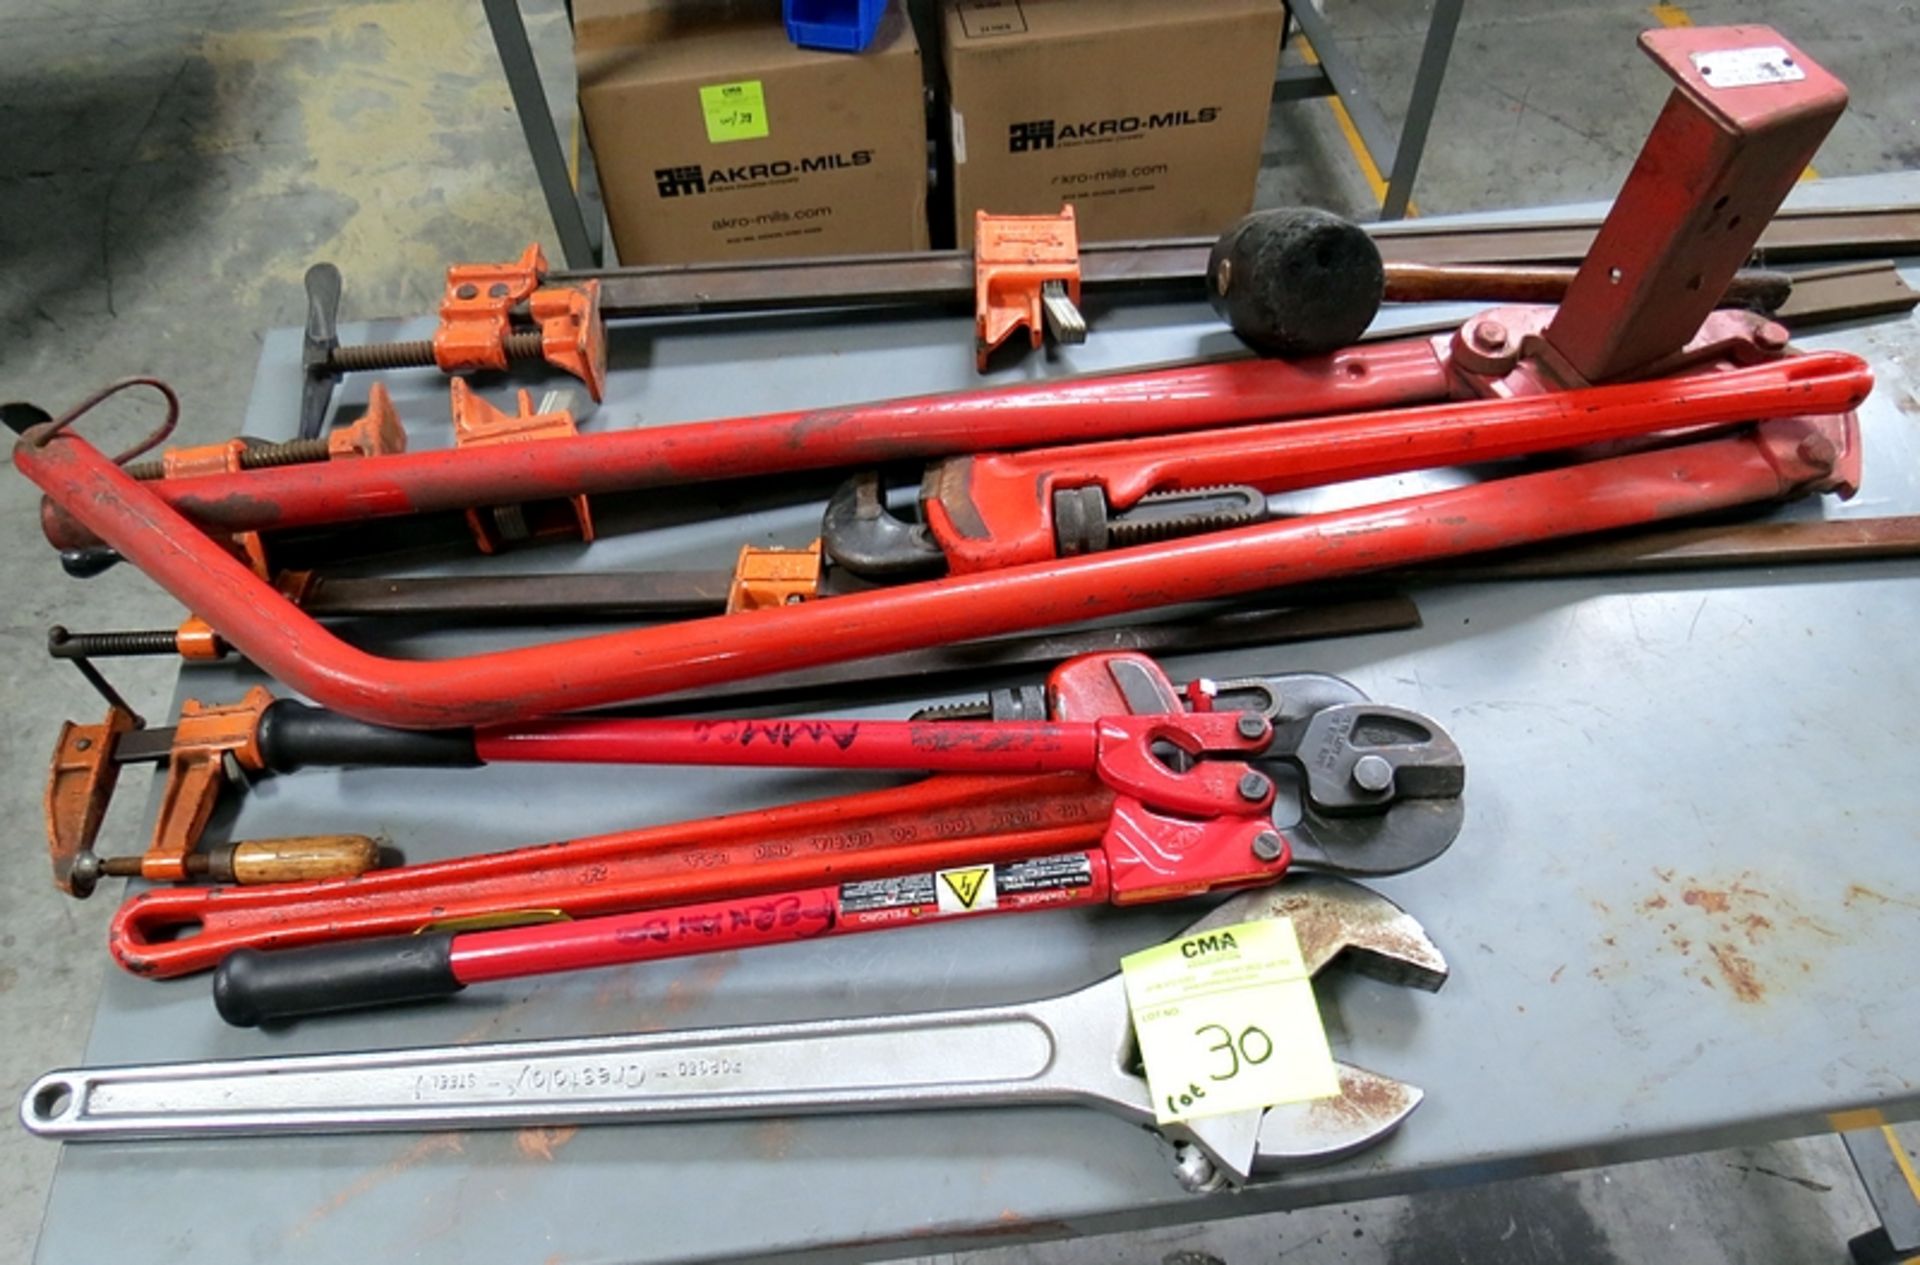 LOT OF LARGE HAND TOOLS, PIPE CUTTERS, WRENCHES, BAR CLAMPS